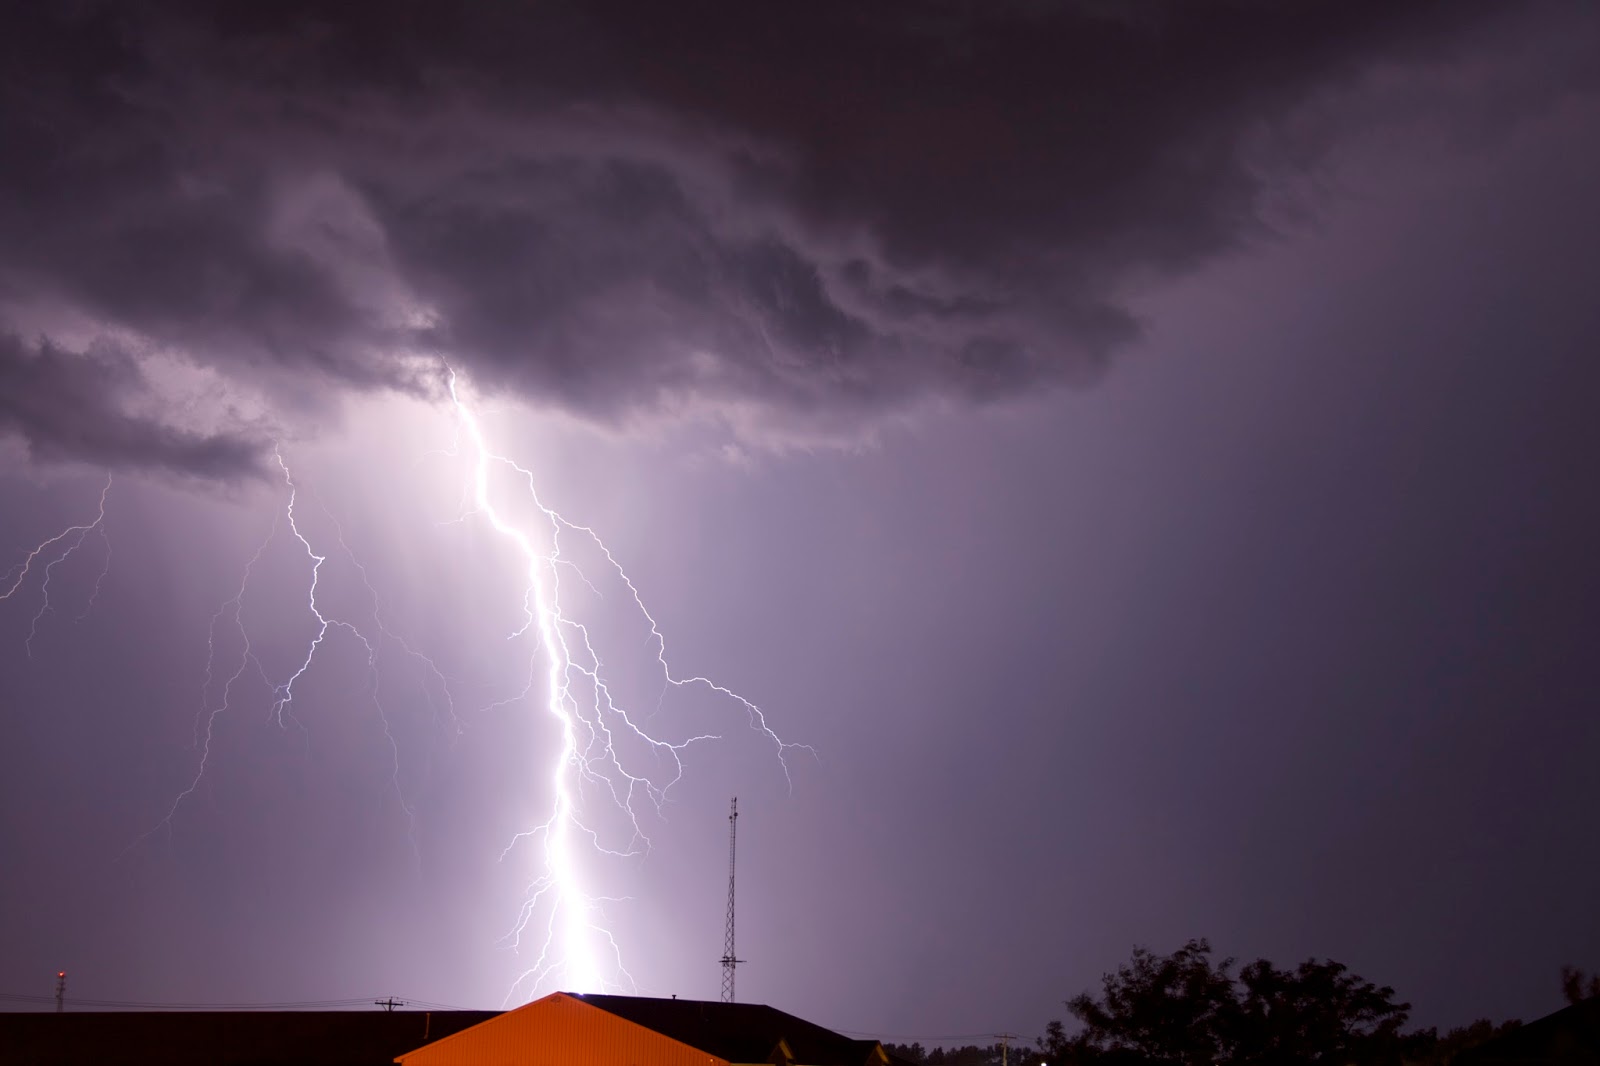 Epic Lightning Photos with Canon Rebel XT, Acquisition Details [Stellar